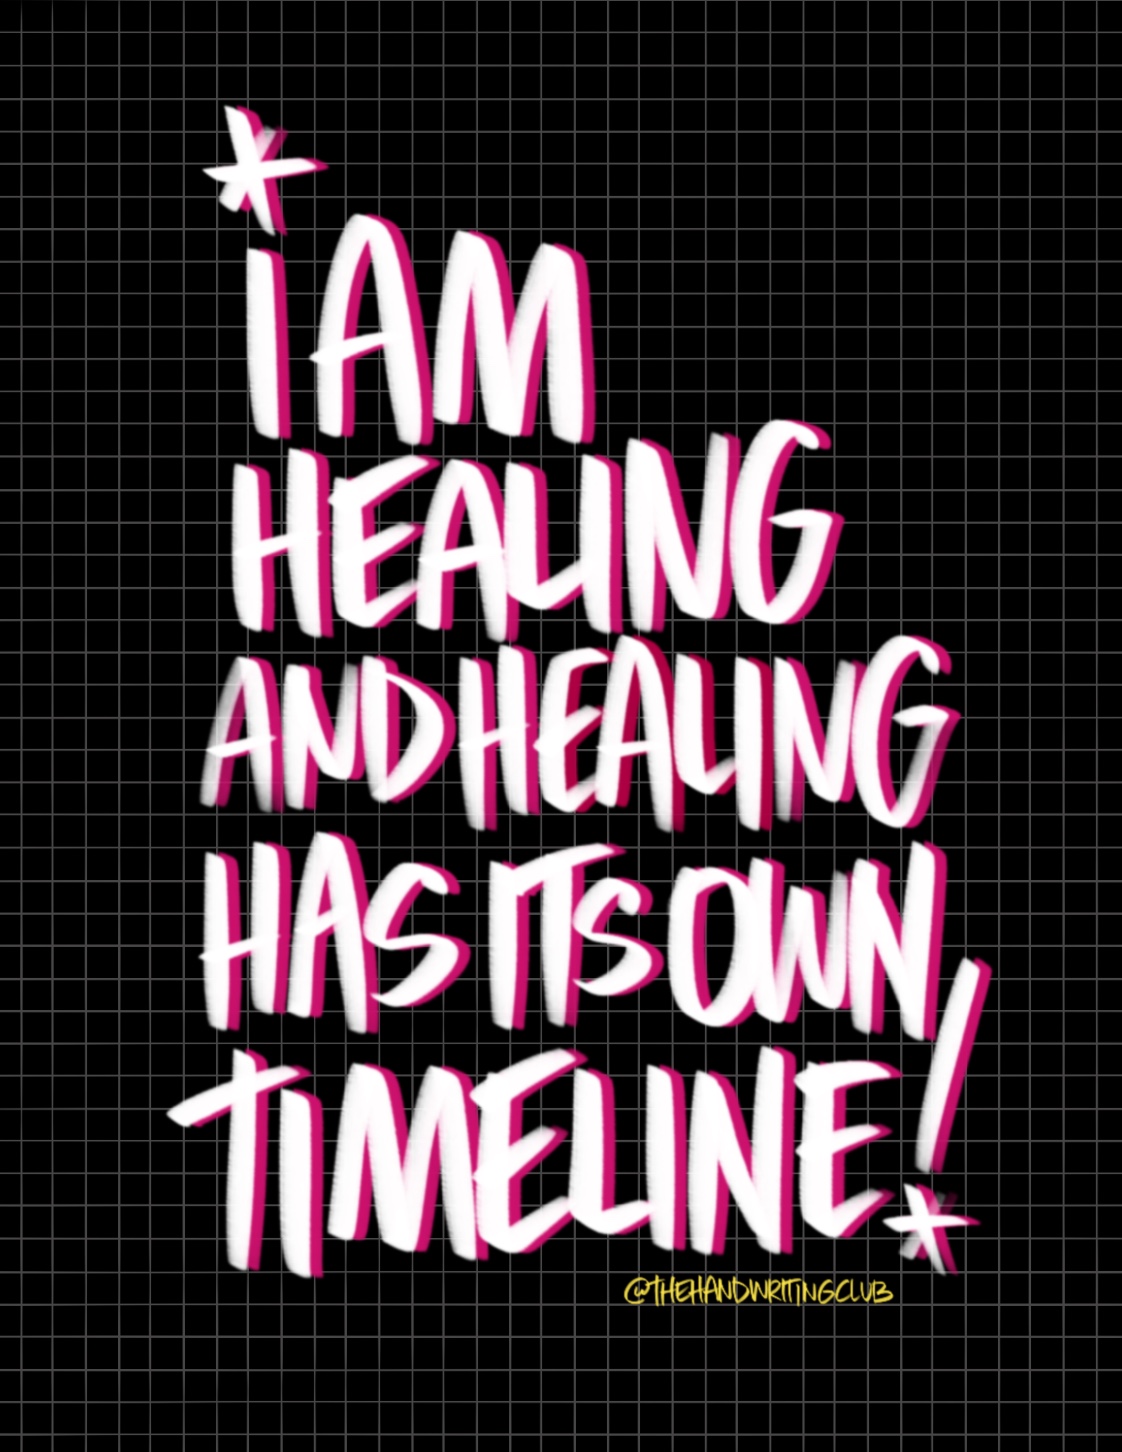 I am healing and healing has its own timeline. -- I love lists artwork by Tracy Benjamin